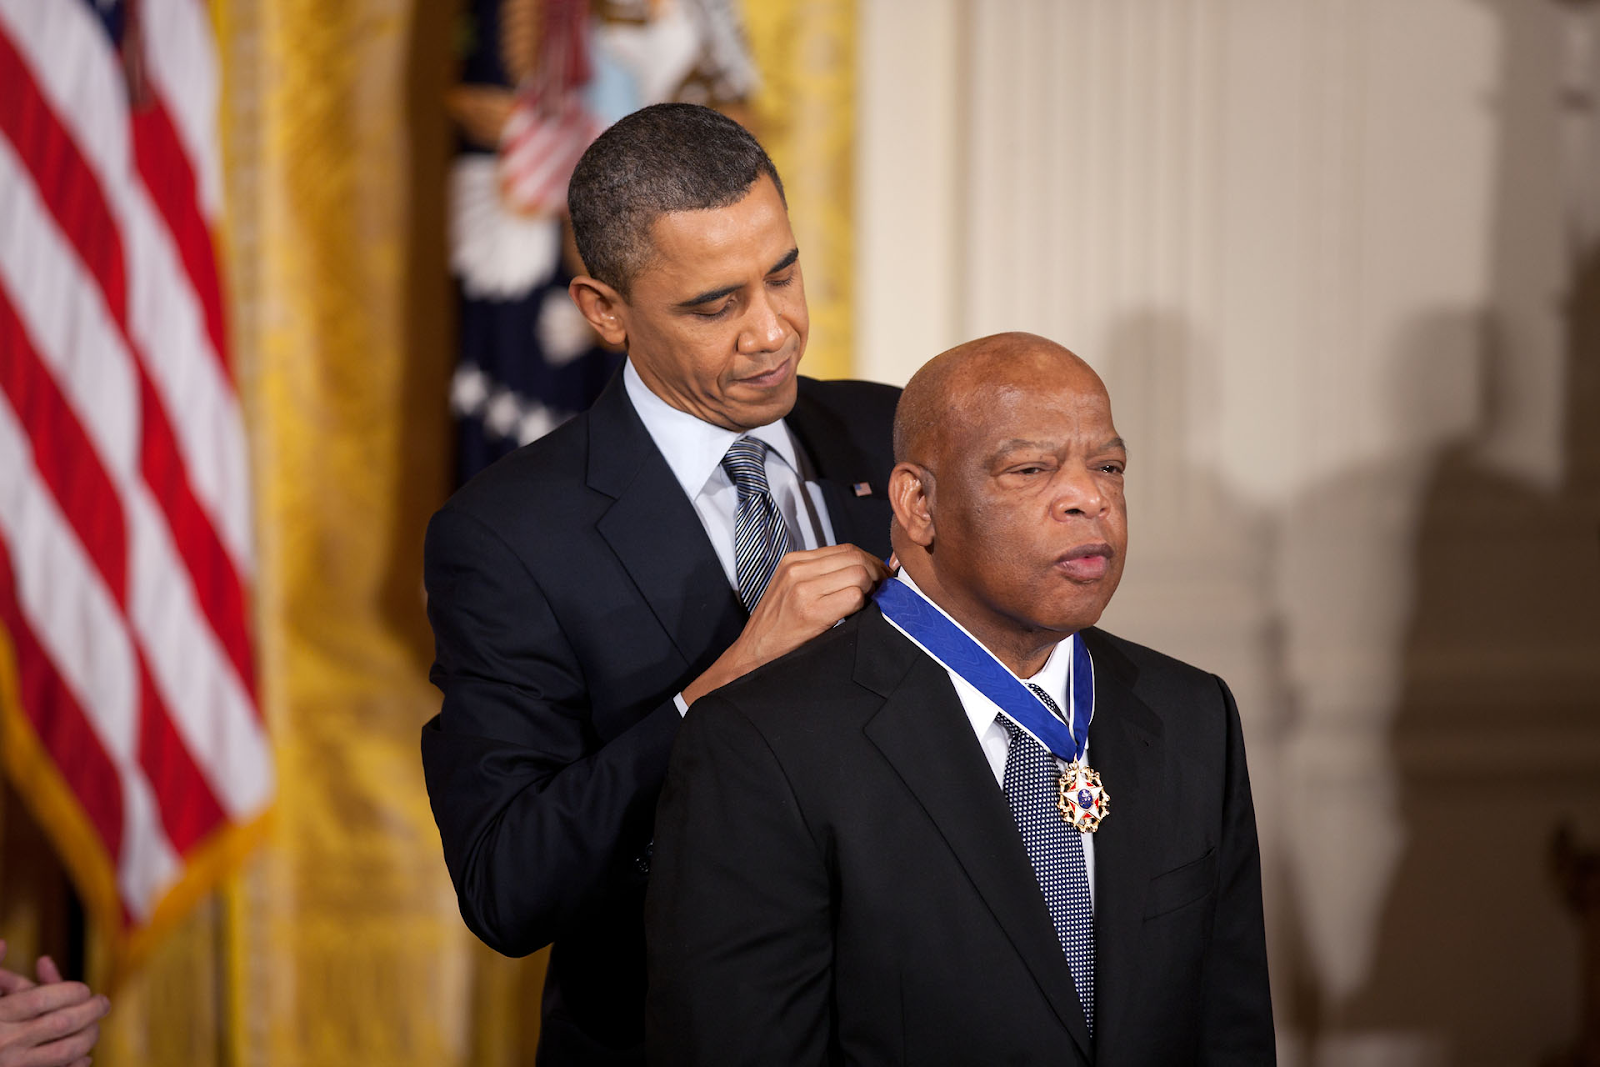 John Lewis being awarded the Presidential Medal of Freedom by President Barack Obama in 2011